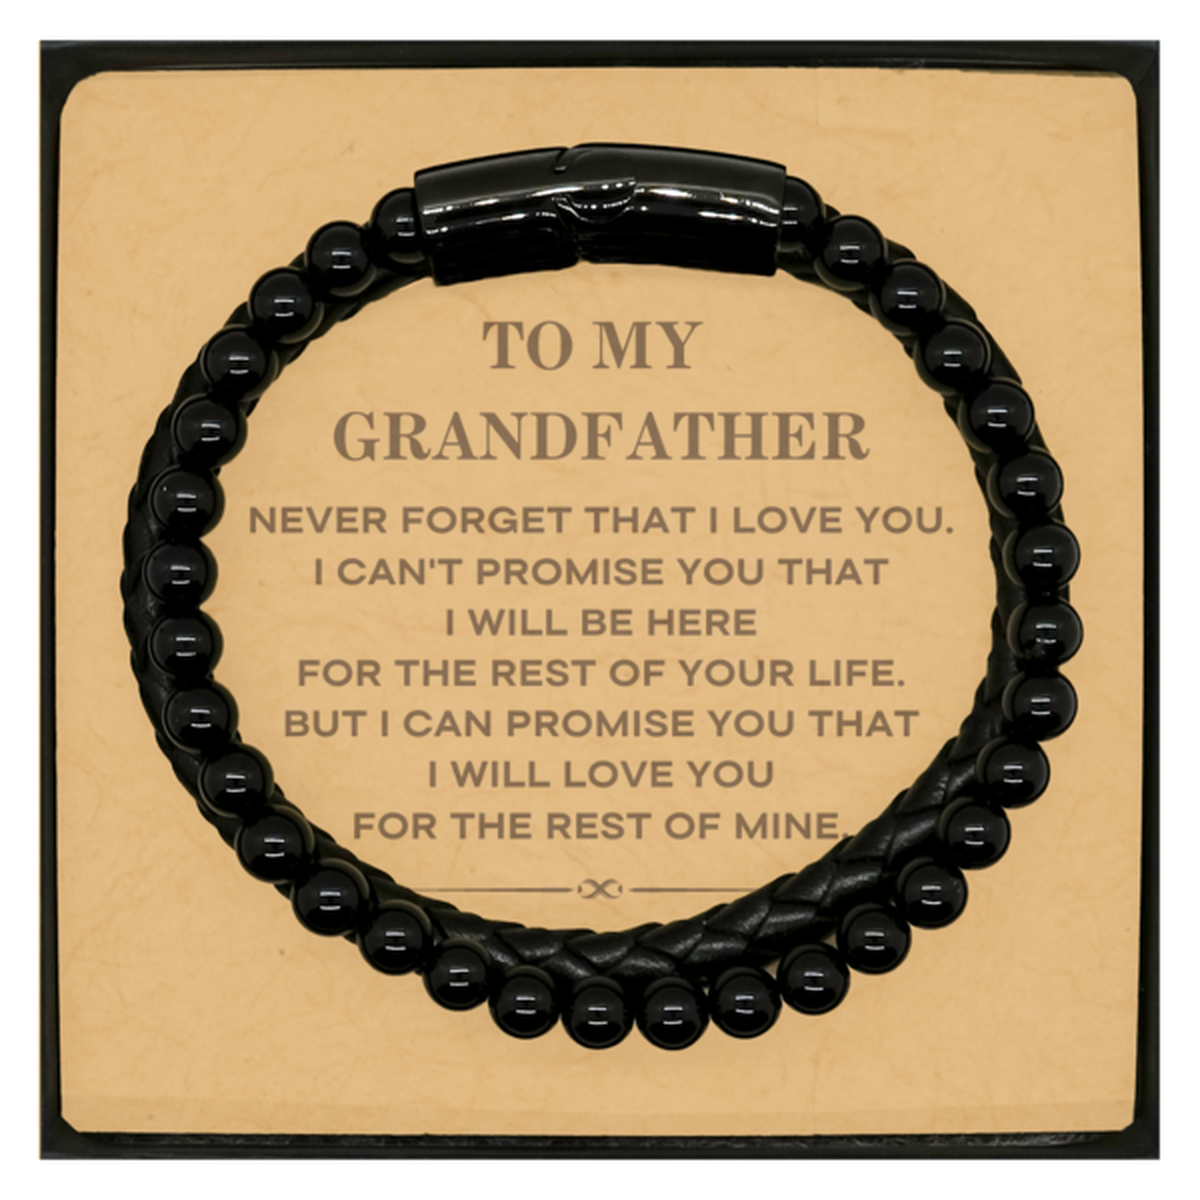 To My Grandfather Gifts, I will love you for the rest of mine, Love Grandfather Bracelet, Birthday Christmas Unique Stone Leather Bracelets For Grandfather